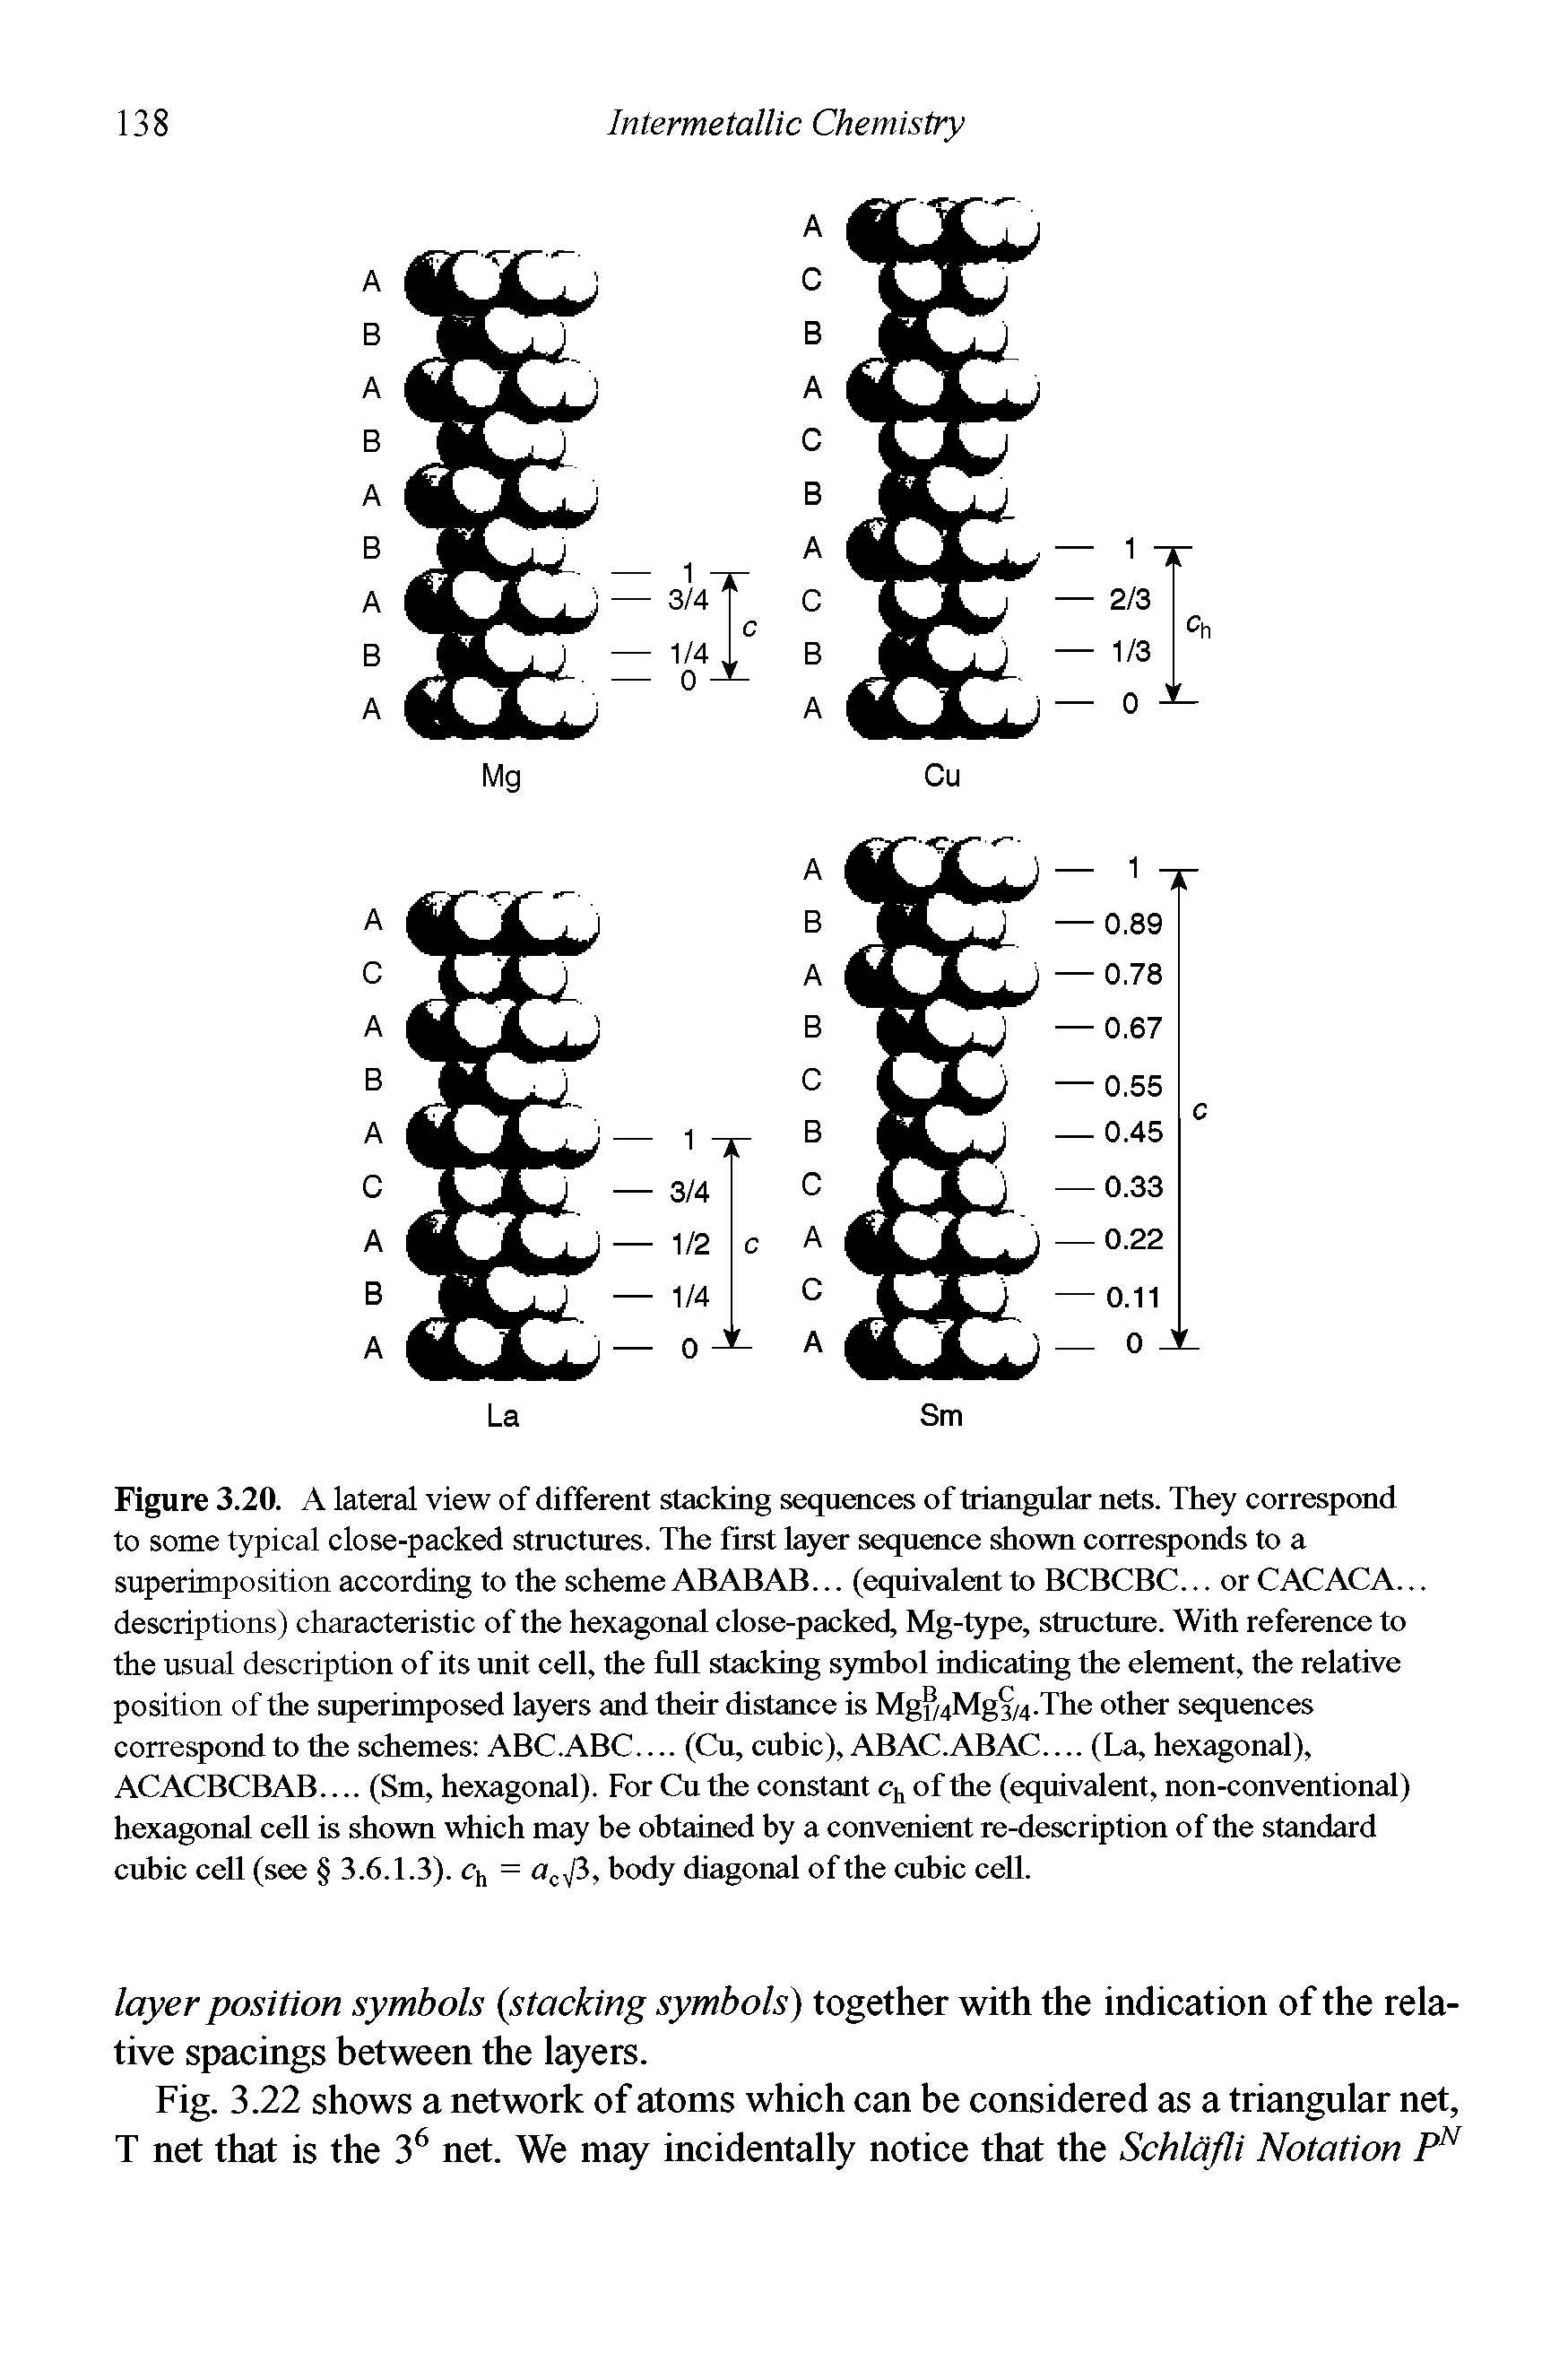 Figure 3.20. A lateral view of different stacking sequences of triangular nets. They correspond to some typical close-packed structures. The first layer sequence shown corresponds to a superimposition according to the scheme ABABAB... (equivalent to BCBCBC... or CACACA... descriptions) characteristic of the hexagonal close-packed, Mg-type, structure. With reference to the usual description of its unit cell, the full stacking symbol indicating the element, the relative position of the superimposed layers and their distance is Mg Mg. The other sequences correspond to the schemes ABC.ABC. (Cu, cubic), ABAC.ABAC. (La, hexagonal), ACACBCBAB. (Sm, hexagonal). For Cu the constant ch of the (equivalent, non-conventional) hexagonal cell is shown which may be obtained by a convenient re-description of the standard cubic cell (see 3.6.1.3). ch = cV 3, body diagonal of the cubic cell.